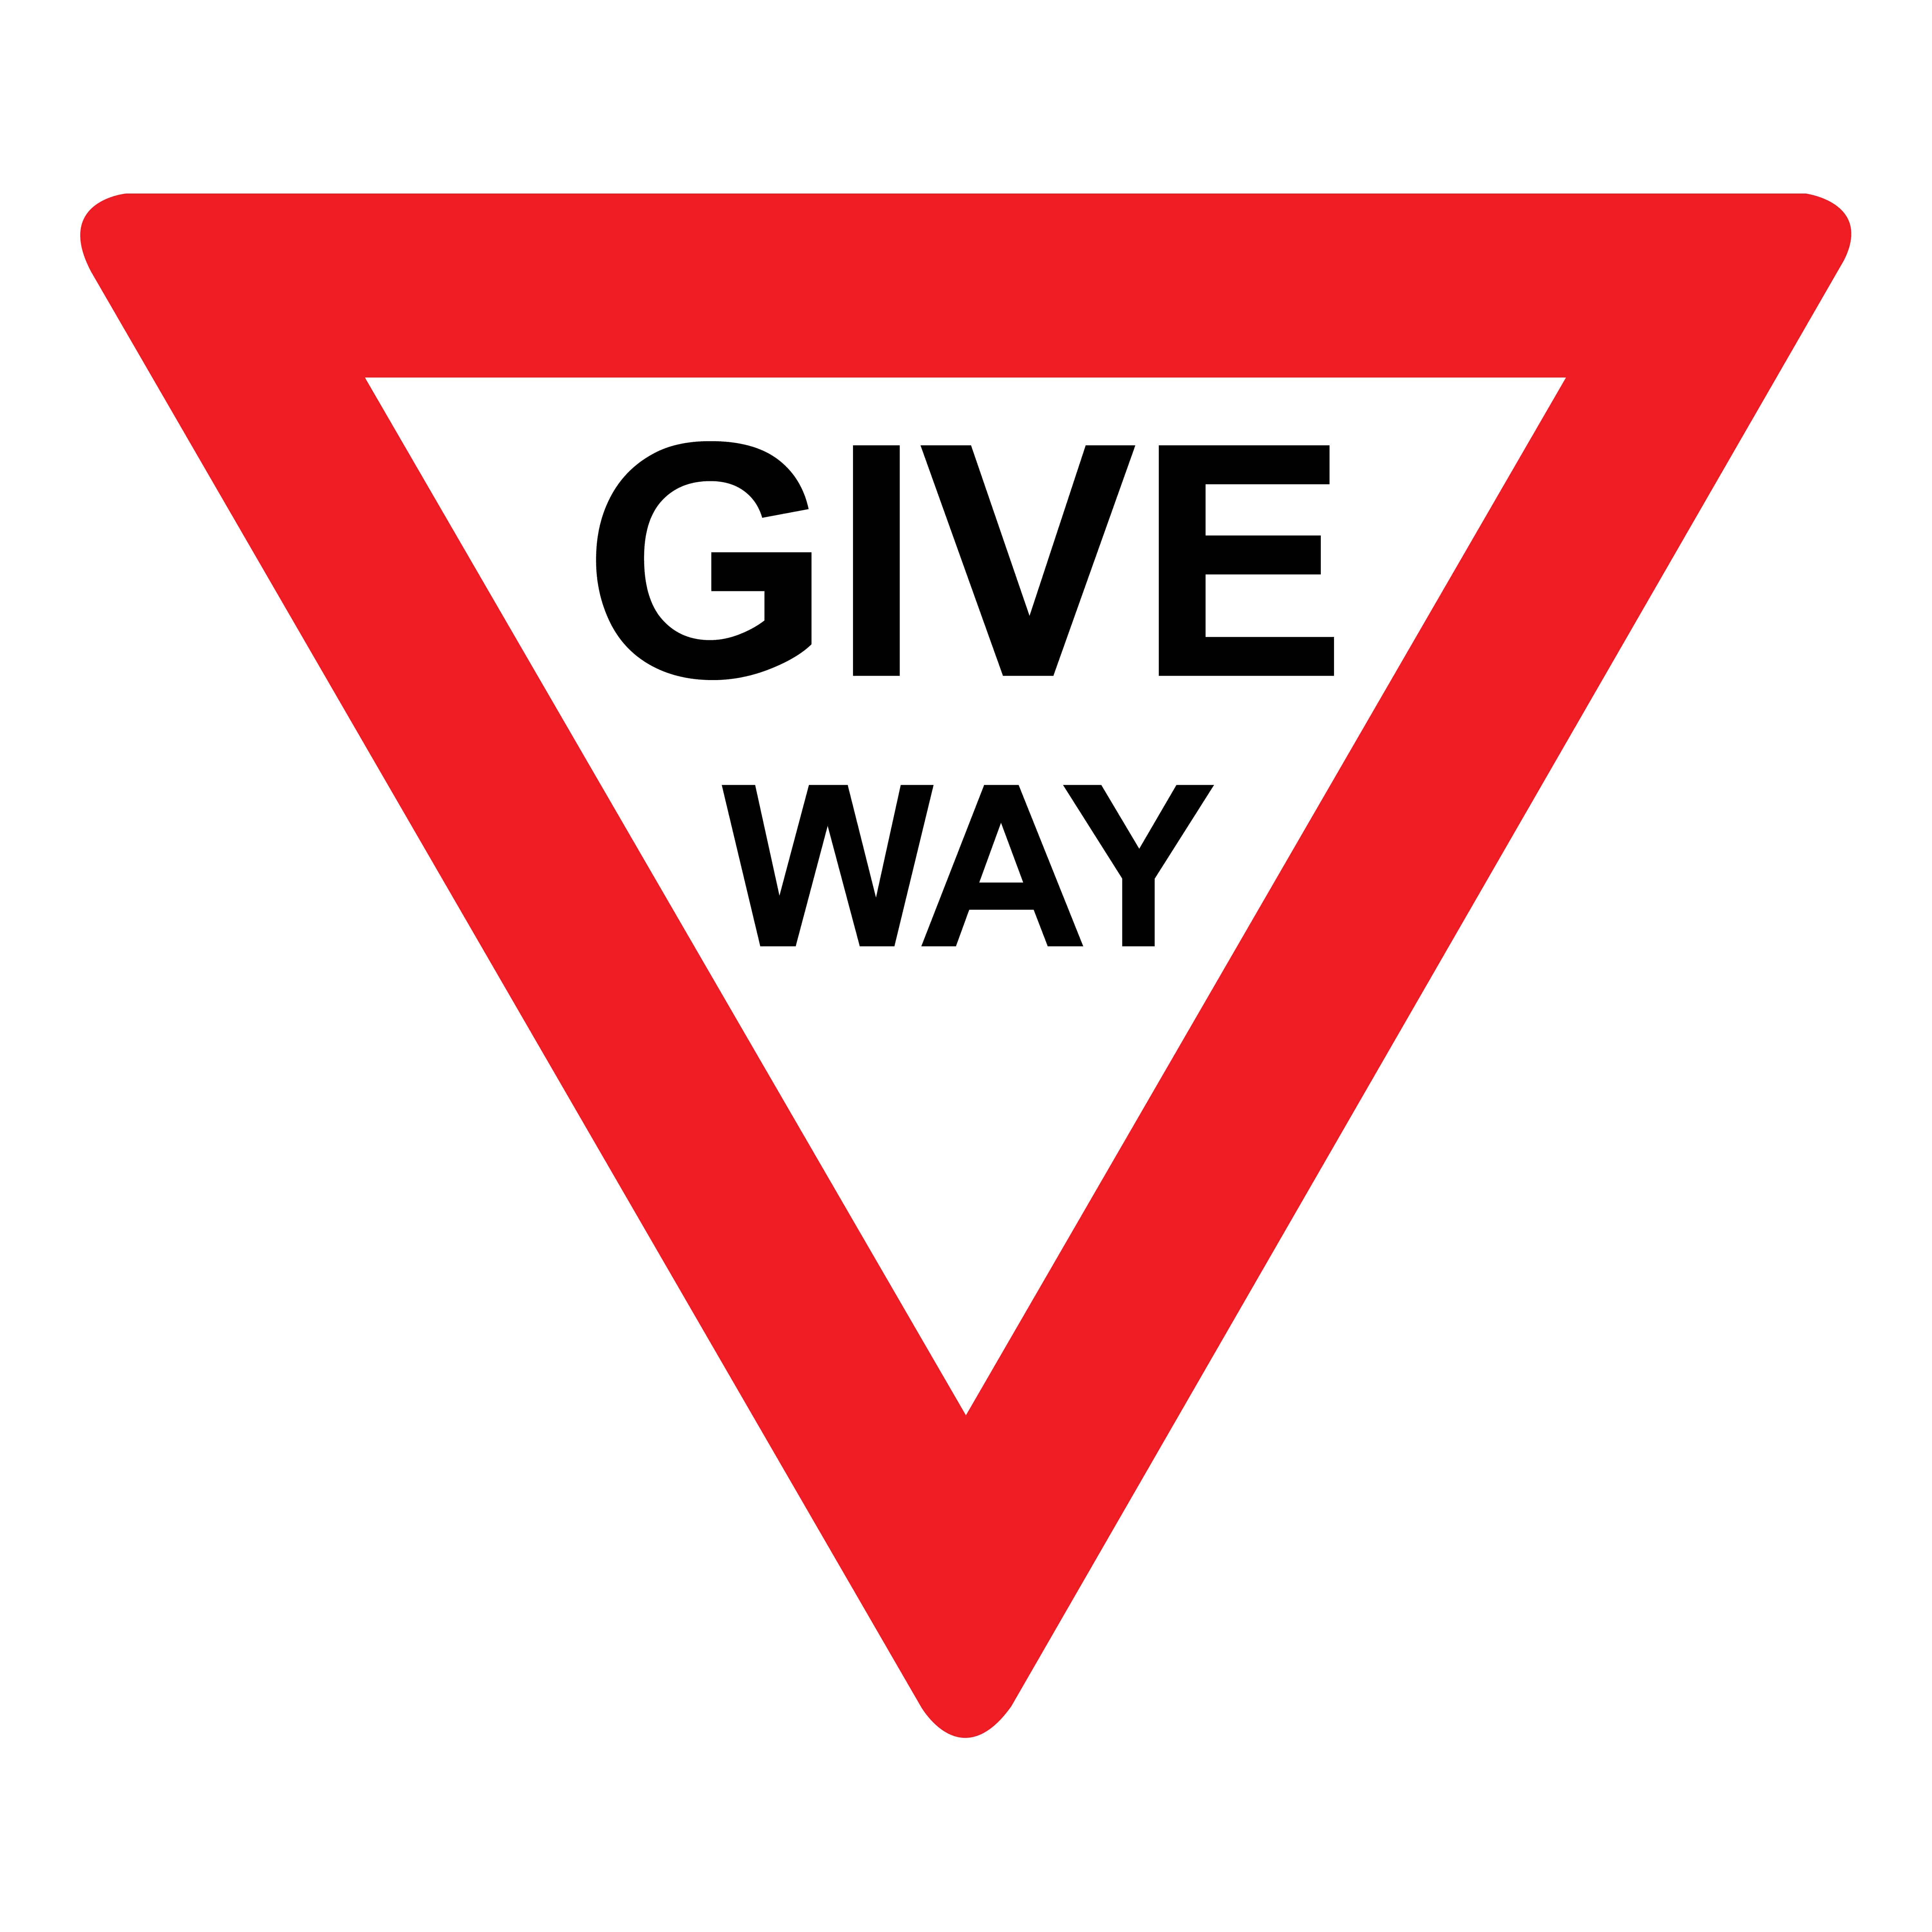 UK Road Signs: 5 Vital Things to Learn for Your Theory Test